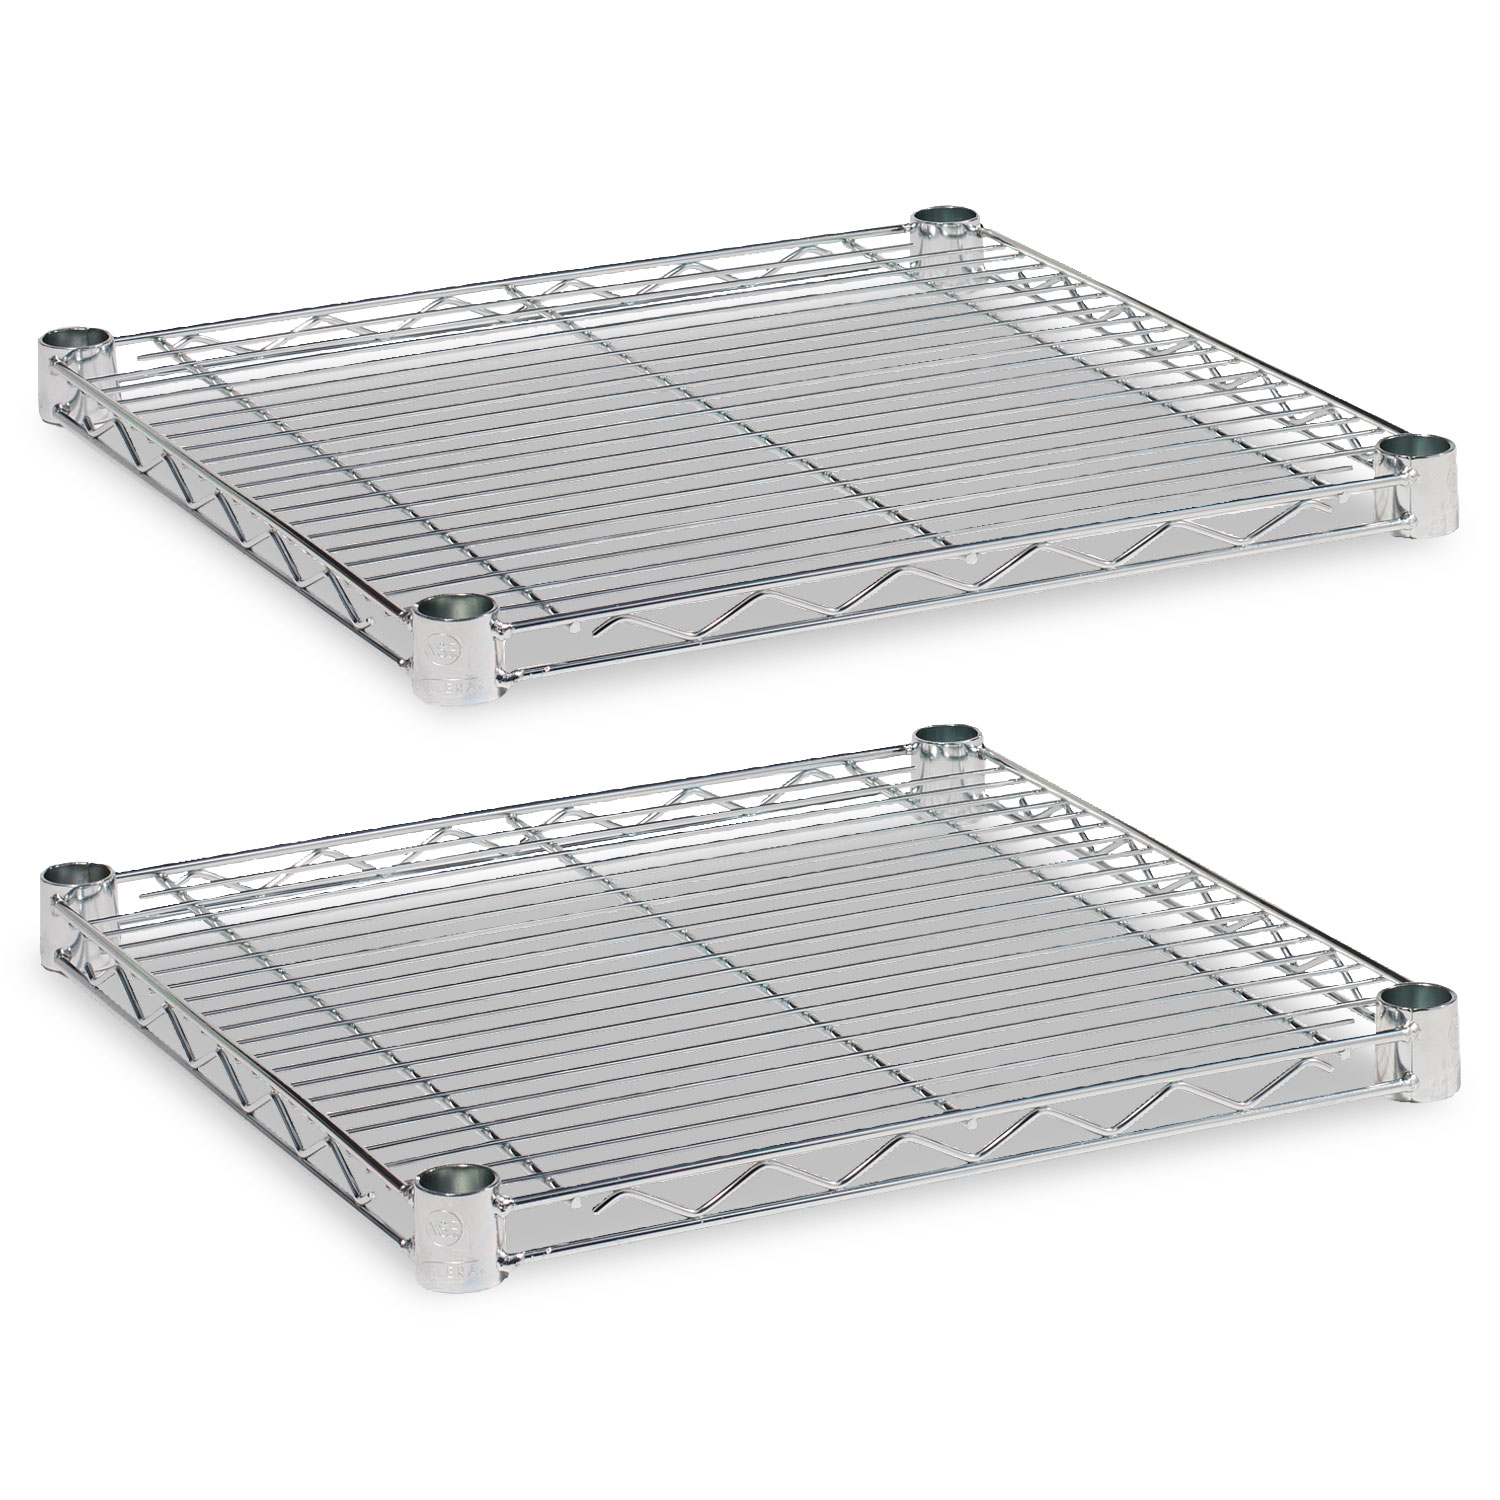 Alera Industrial Wire Shelving Extra Wire Shelves, 18w x 18d, Silver, 2 Shelves/Carton